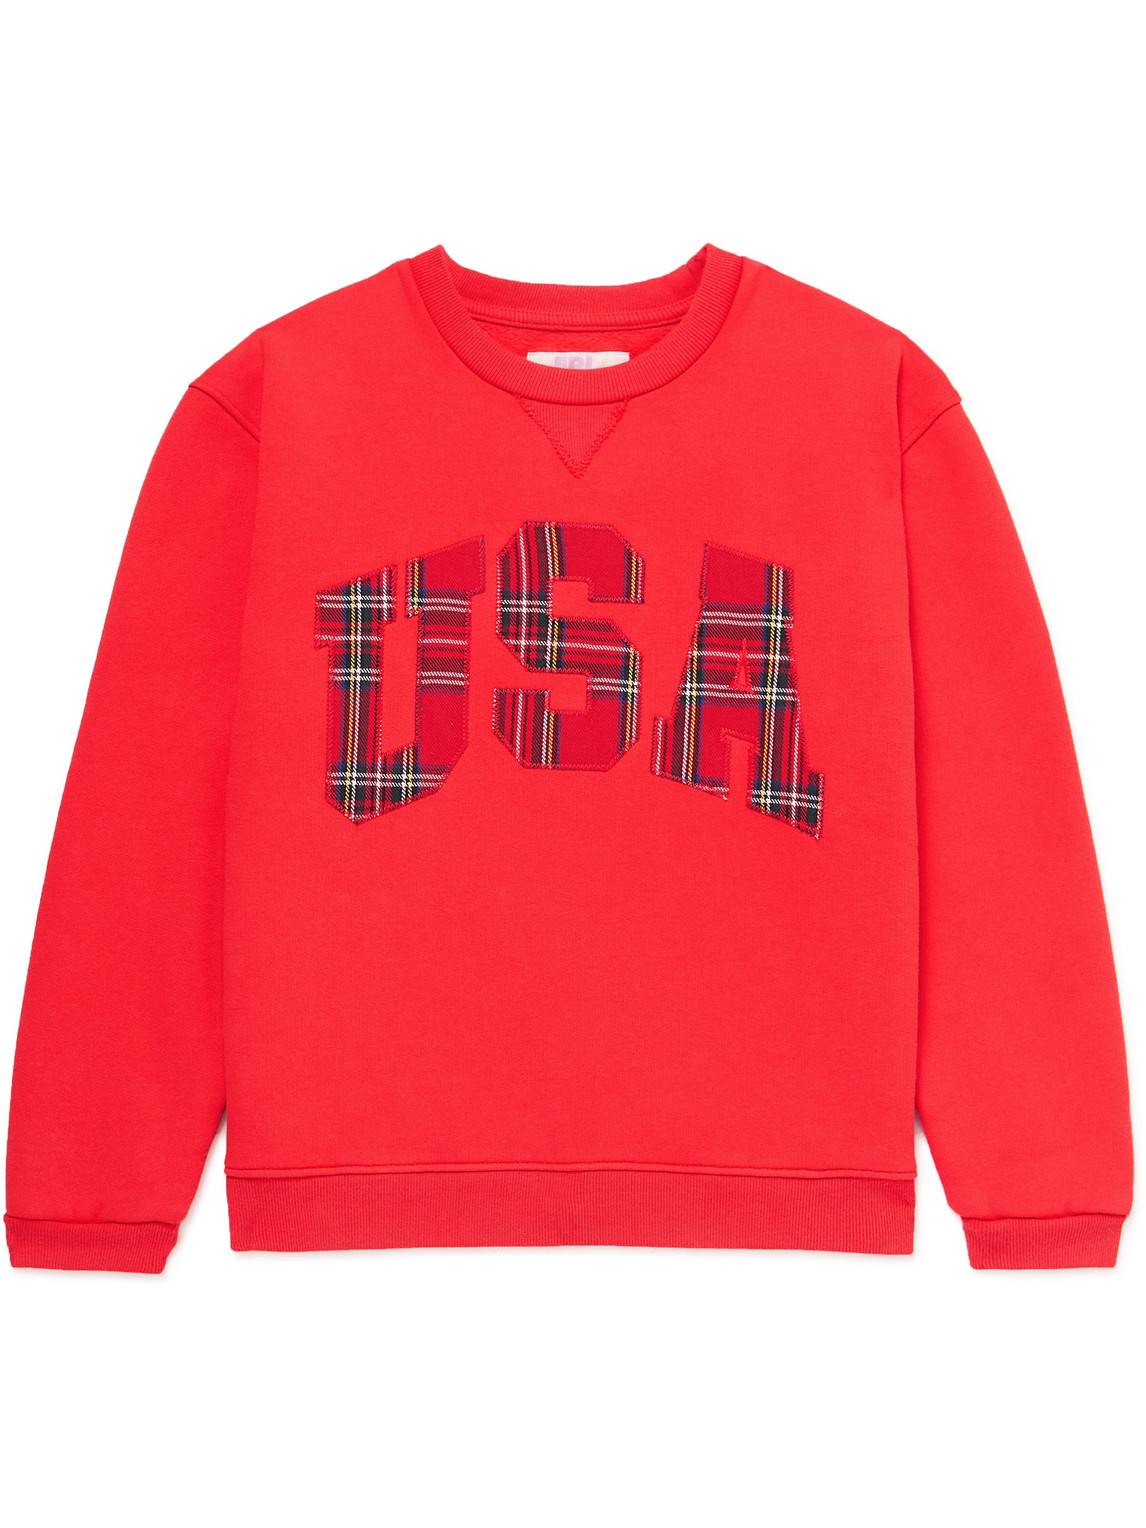 Embroidered Checked Cotton-Blend Jersey Sweatshirt